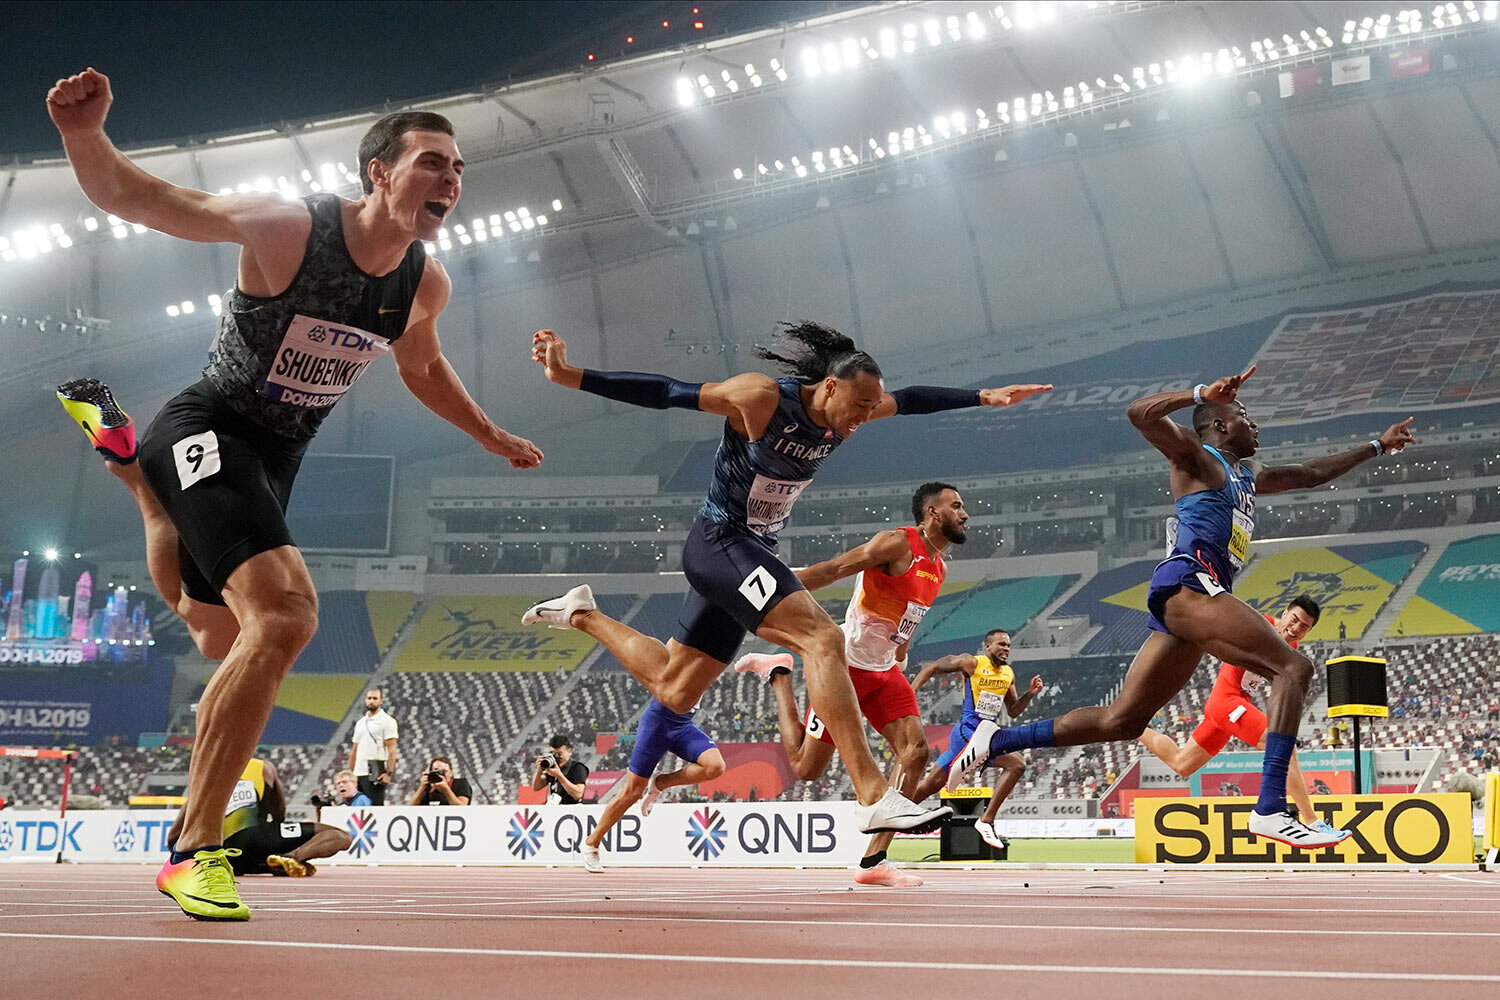  Gold medallist Grant Holloway, of the United States, right, crosses the finish line ahead of Pascal Martinot-Lagarde, of France (7), and Orlando Ortega, of Spain (5), to win the men's 110 meter hurdles final at the World Athletics Championships in D